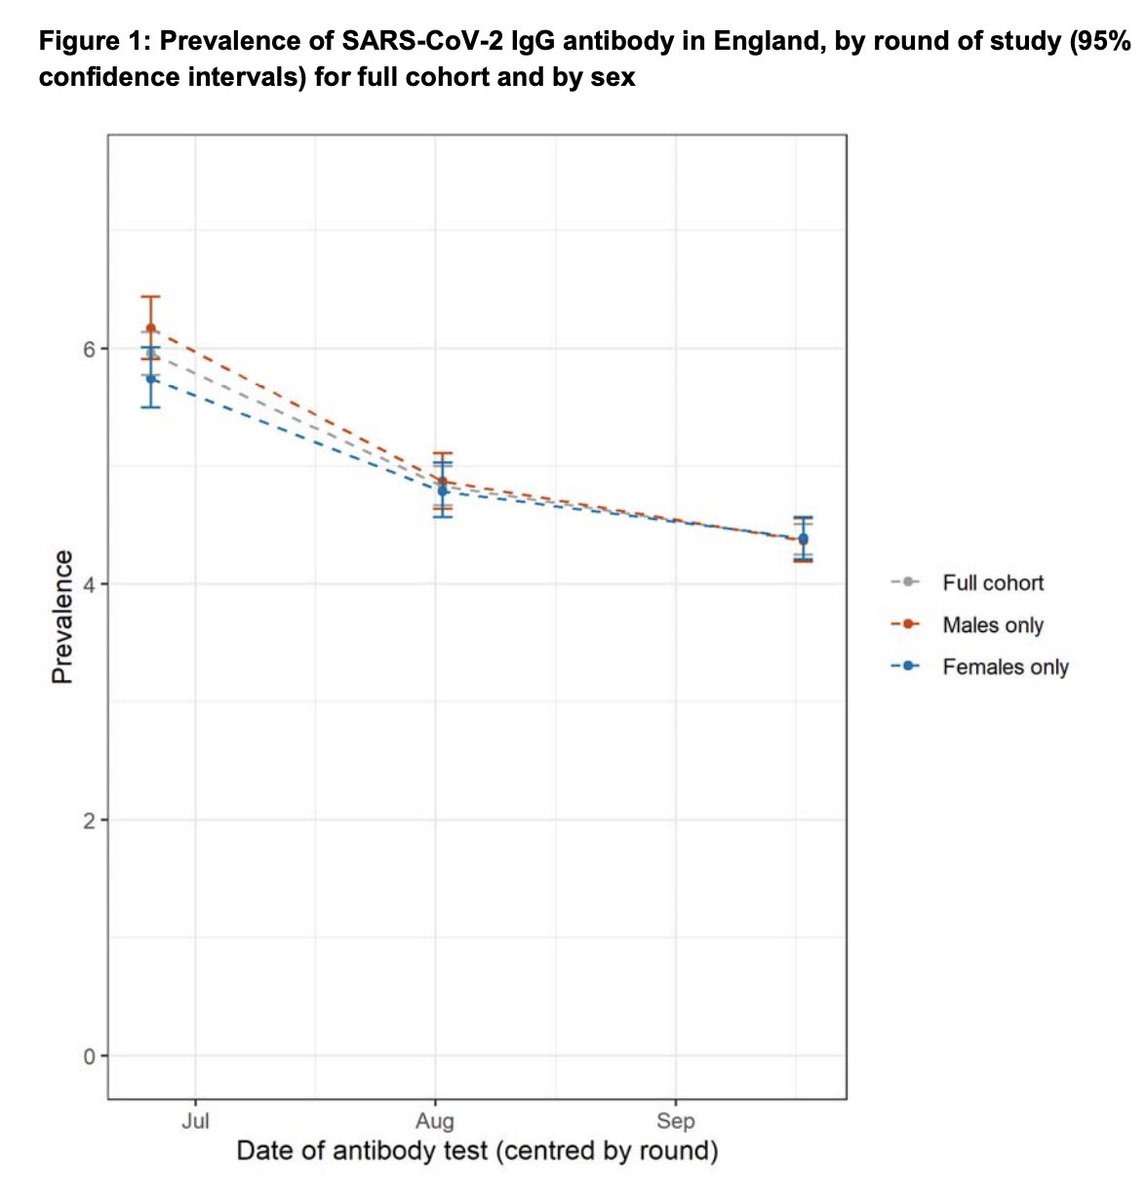 What did we find?The proportion of adults in England who tested positive for antibodies was 6.0% in R1, 4.8% in R2 and 4.4% in R3, an overall decline of 26%. 4/n